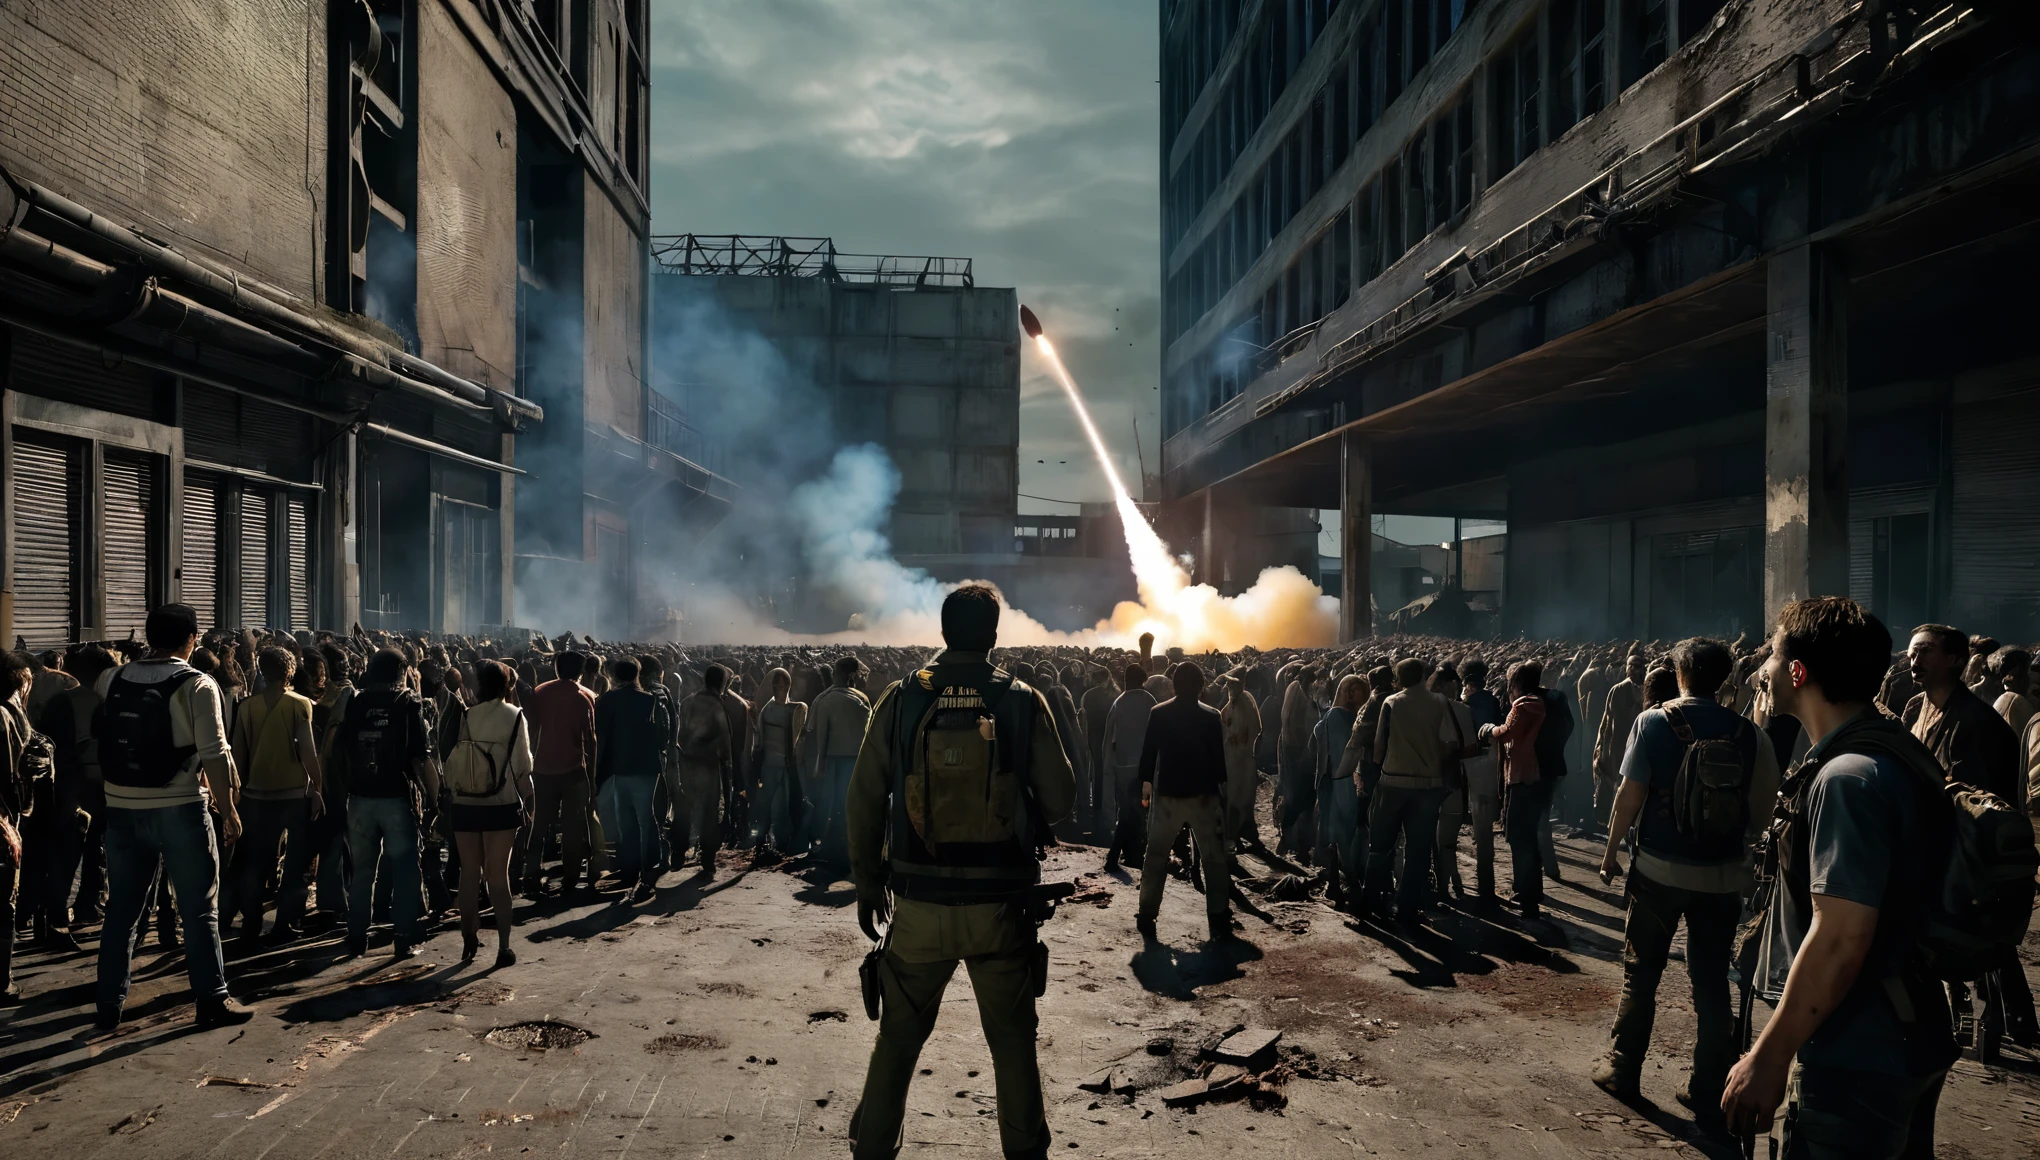 A rocket launch in a world overrun by zombies, with dark, eerie lighting and decayed surroundings. The crowd consists of zombies, and the rocket has a rugged, worn appearance.